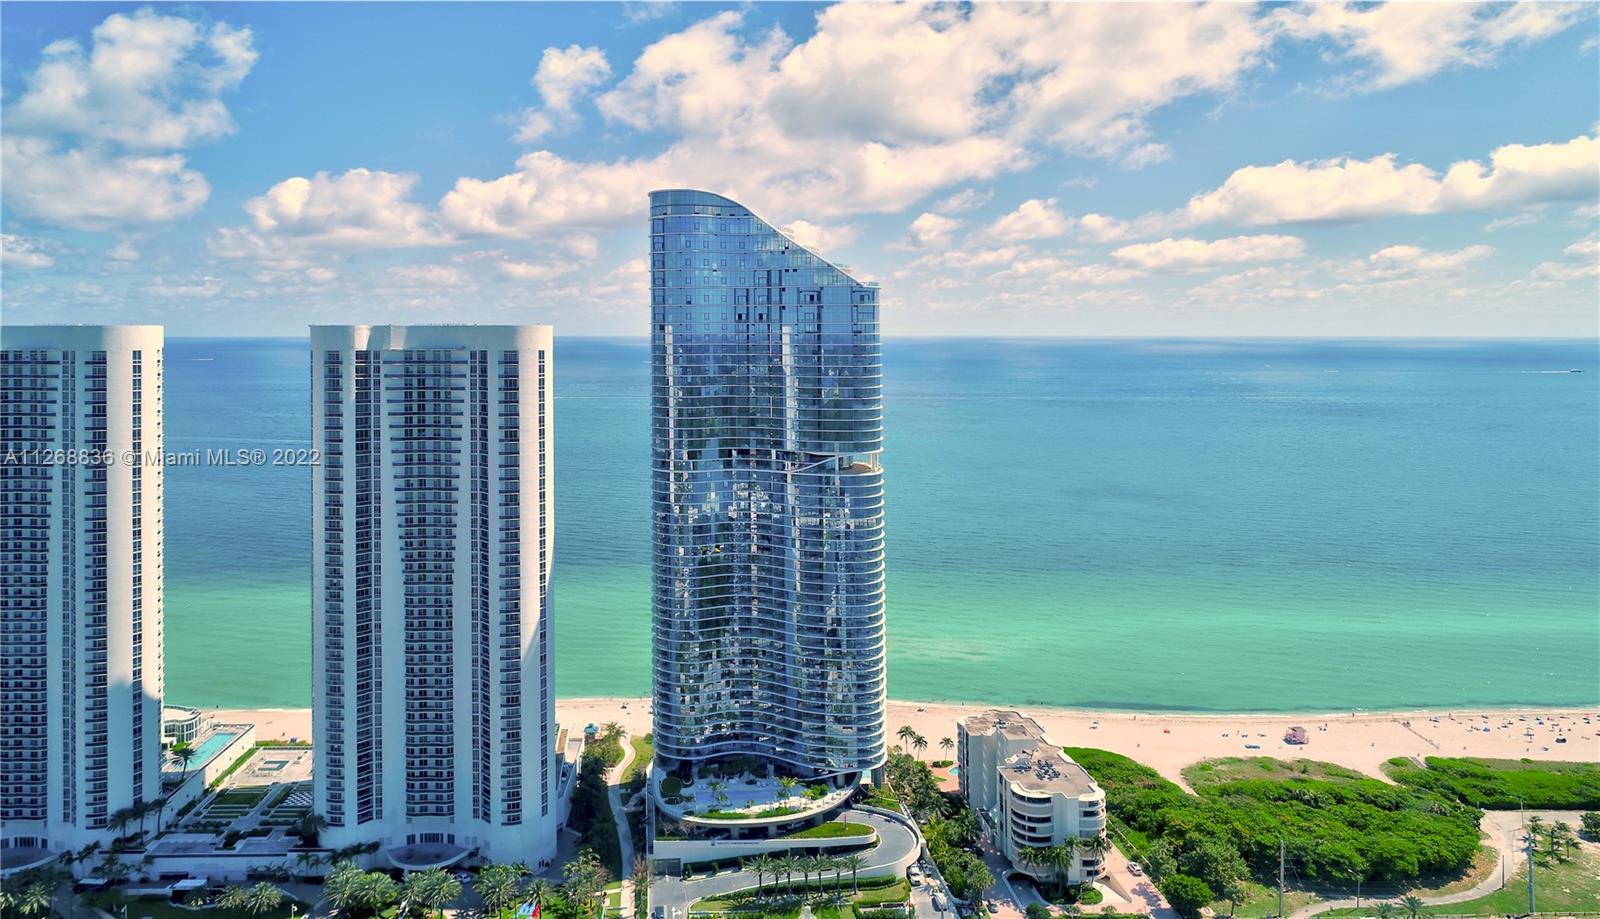 The most spectacular turn-key corner residence at Ritz Carlton Sunny Isles. Magnificent views at the